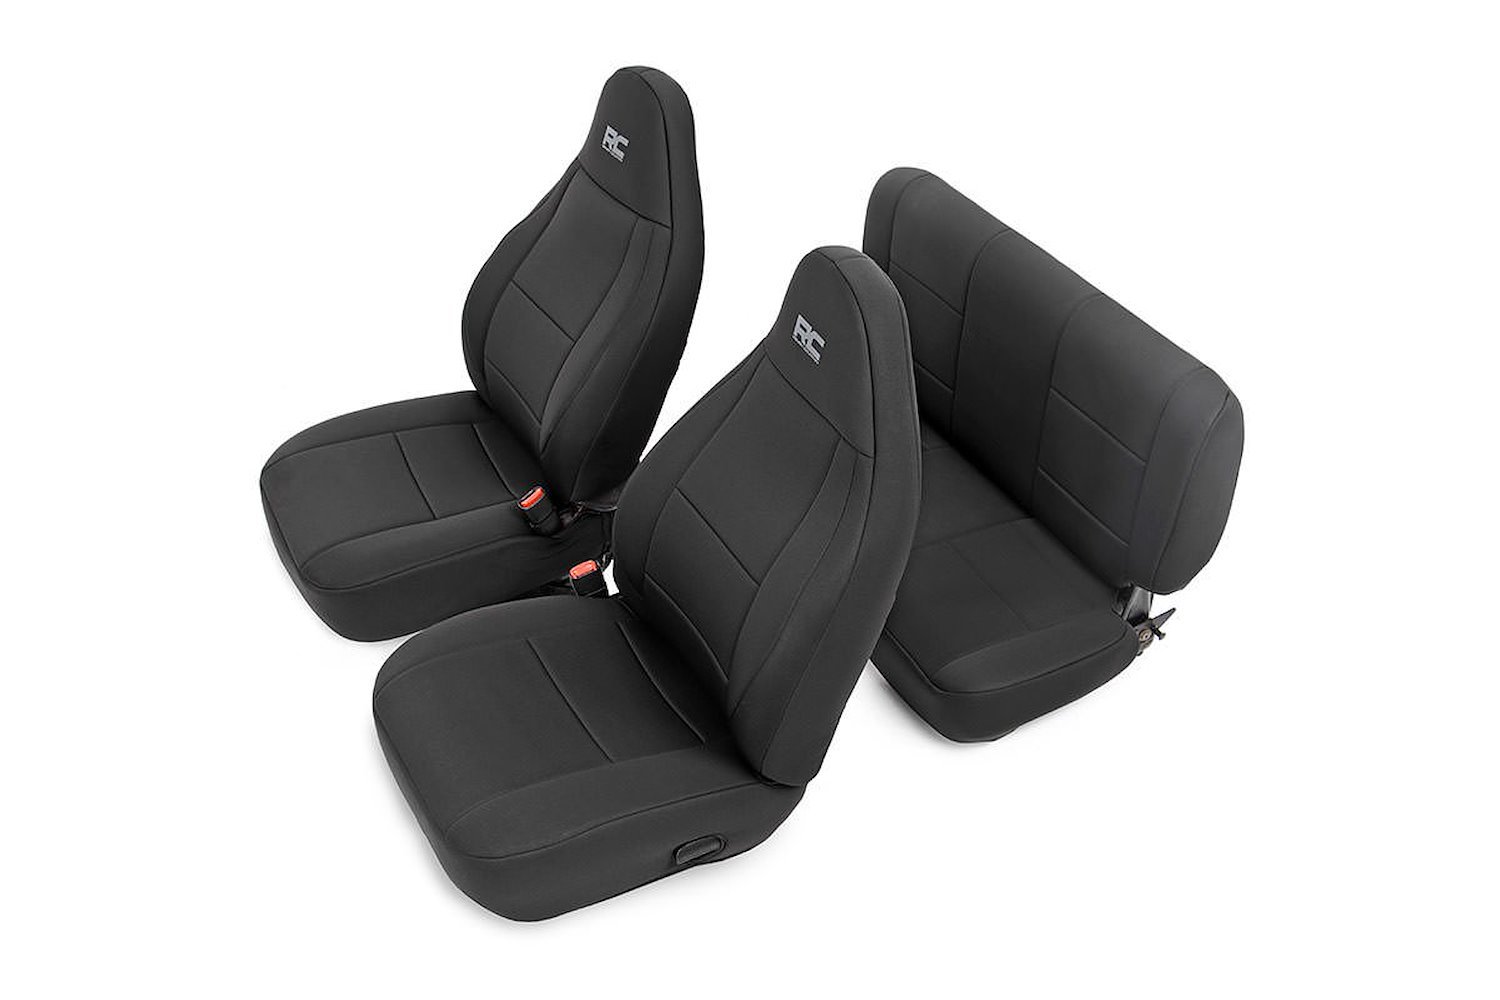 91001 Black Neoprene Seat Cover Set (Front and